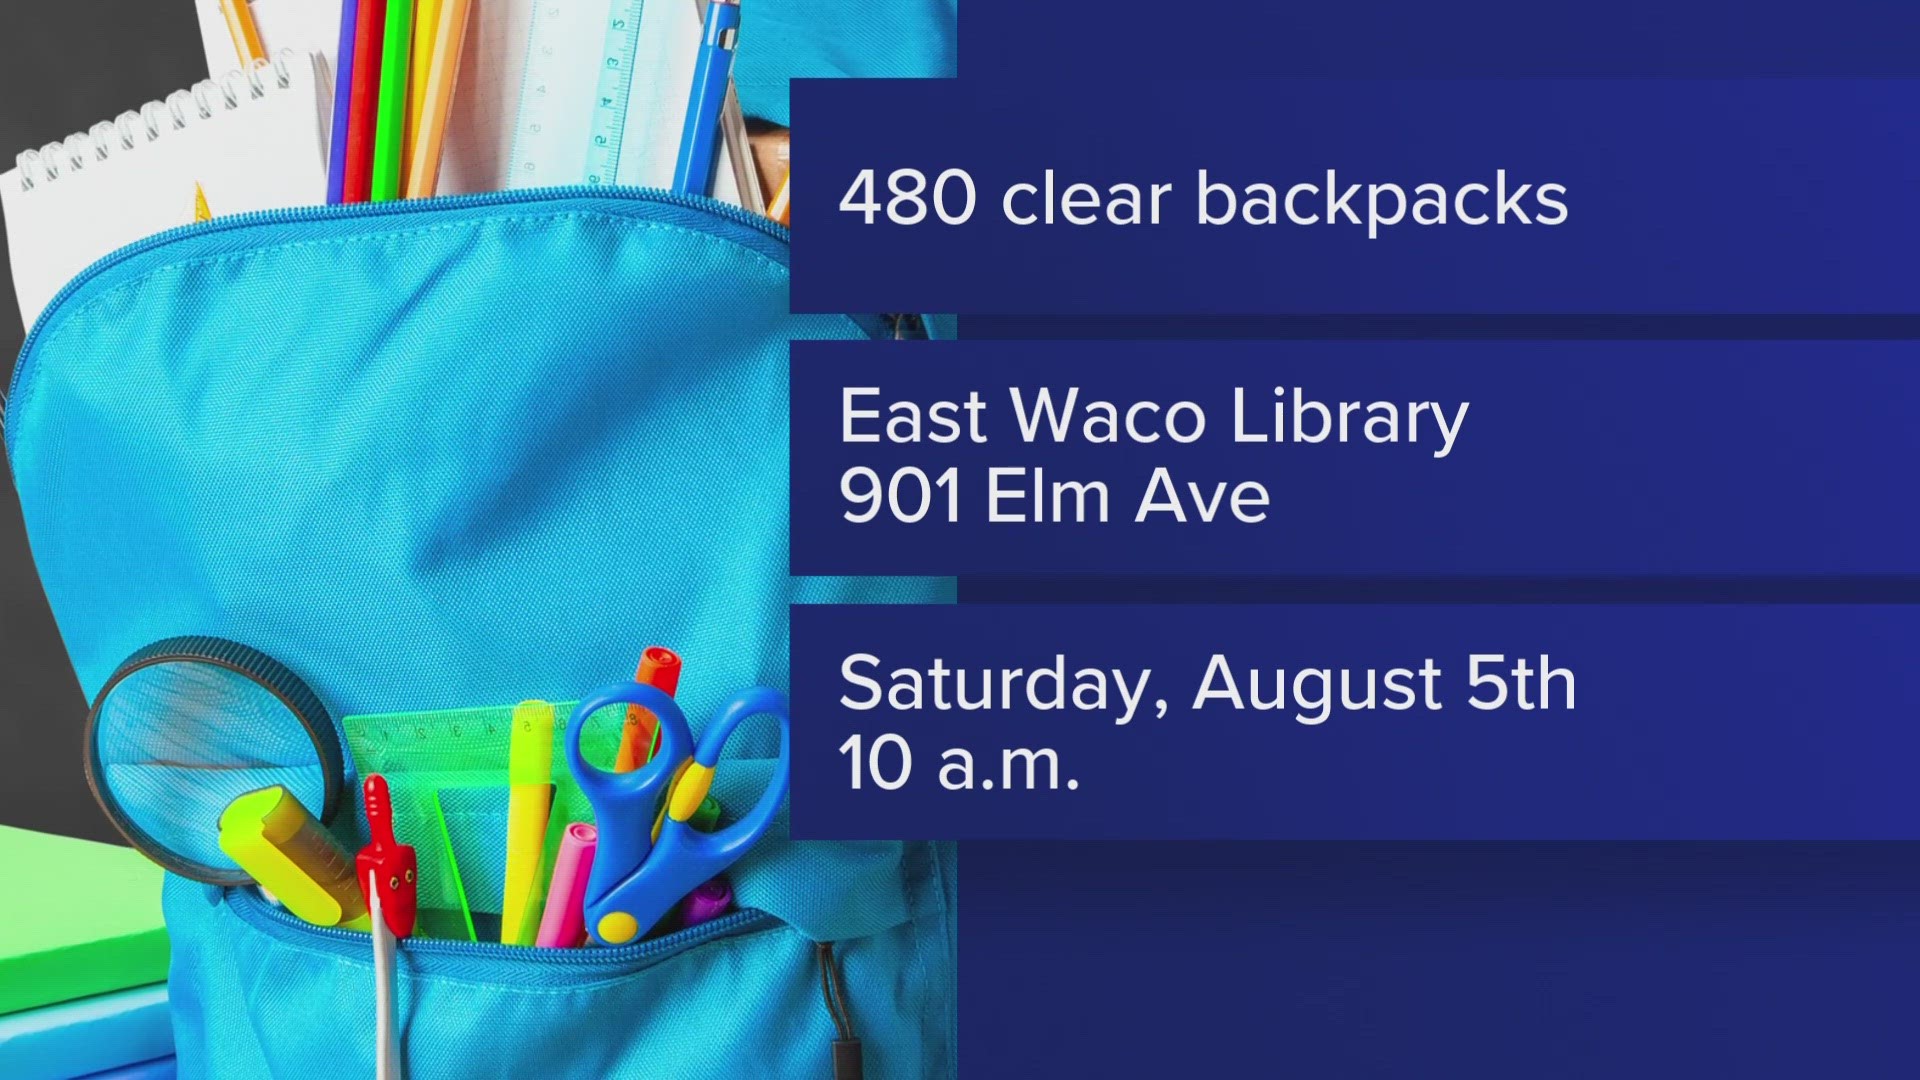 Backpacks full of school supplies will be distributed at the East Waco Library at 10 a.m. on Aug. 5.